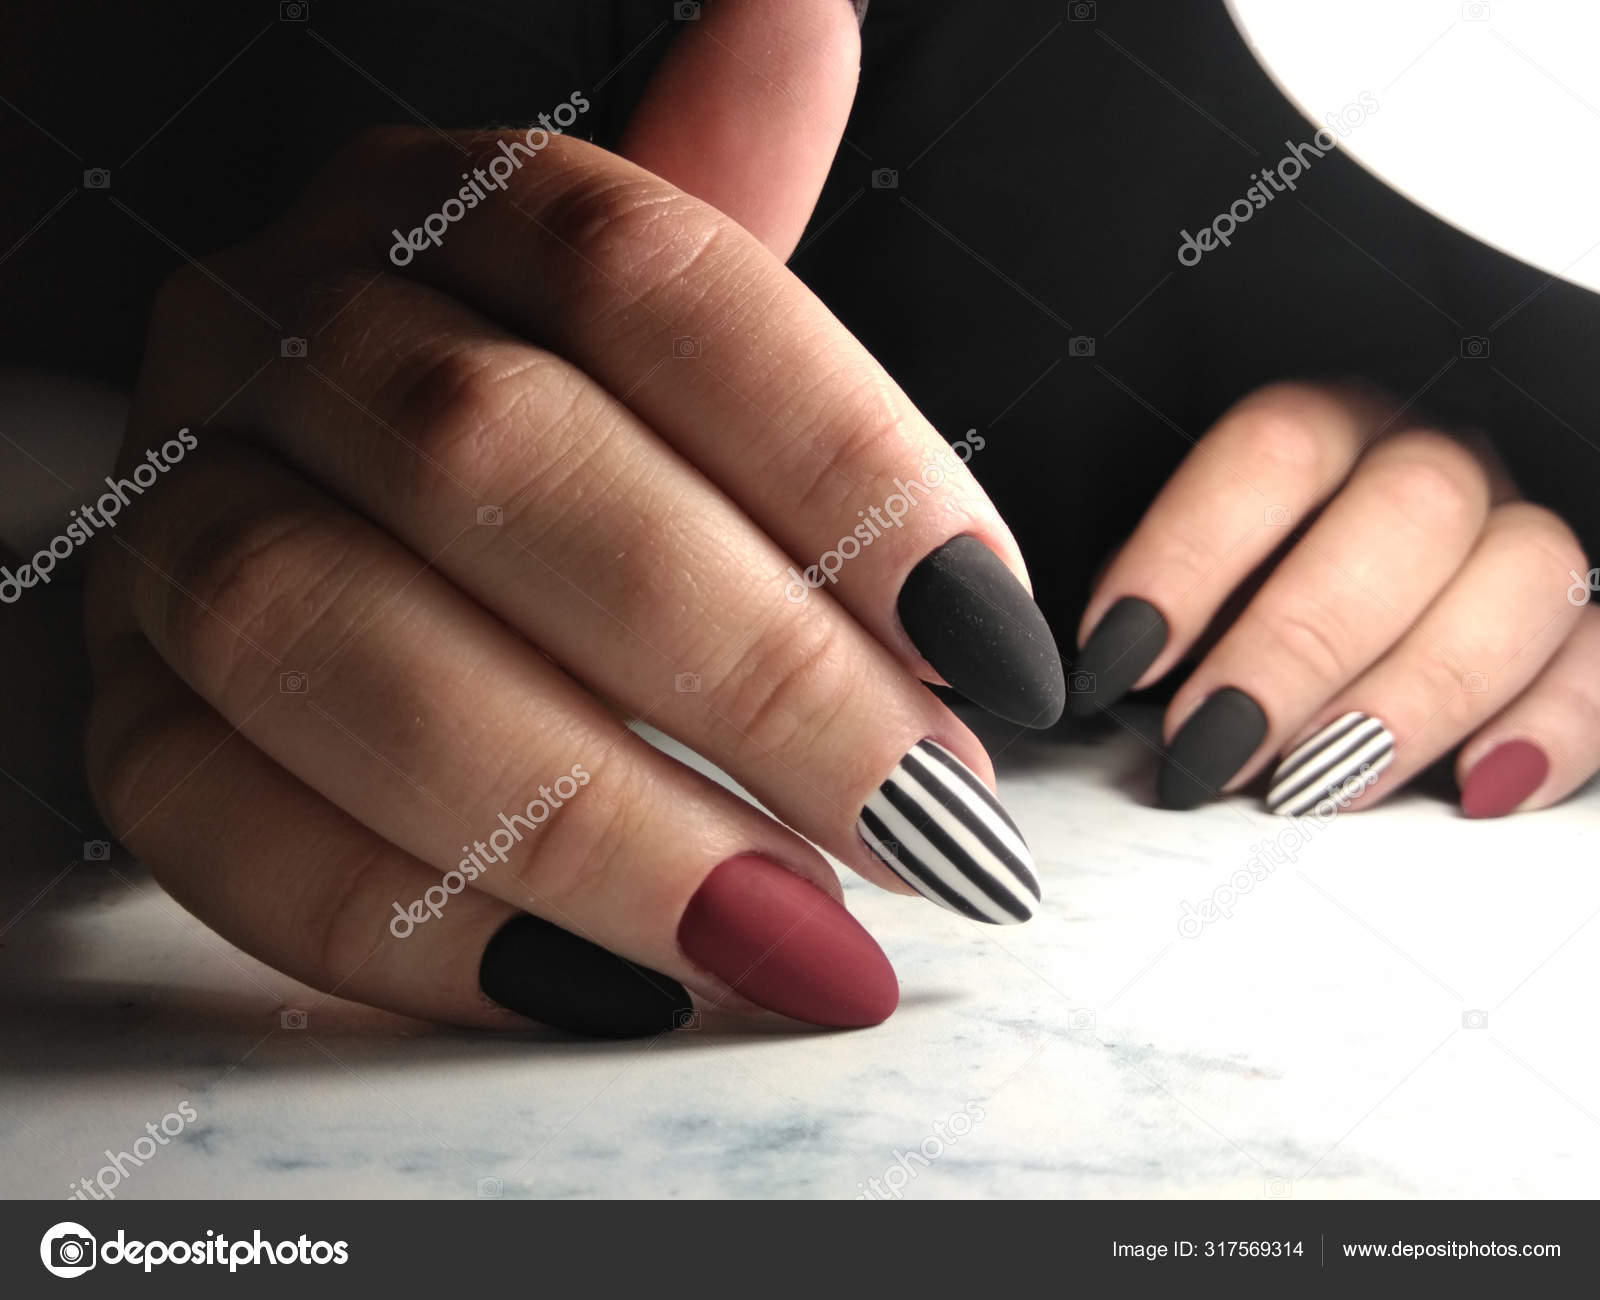 Multicolored Matte Manicure Striped Design Long Extended Nails Black White  Stock Photo by ©katalshov2@ 317569314